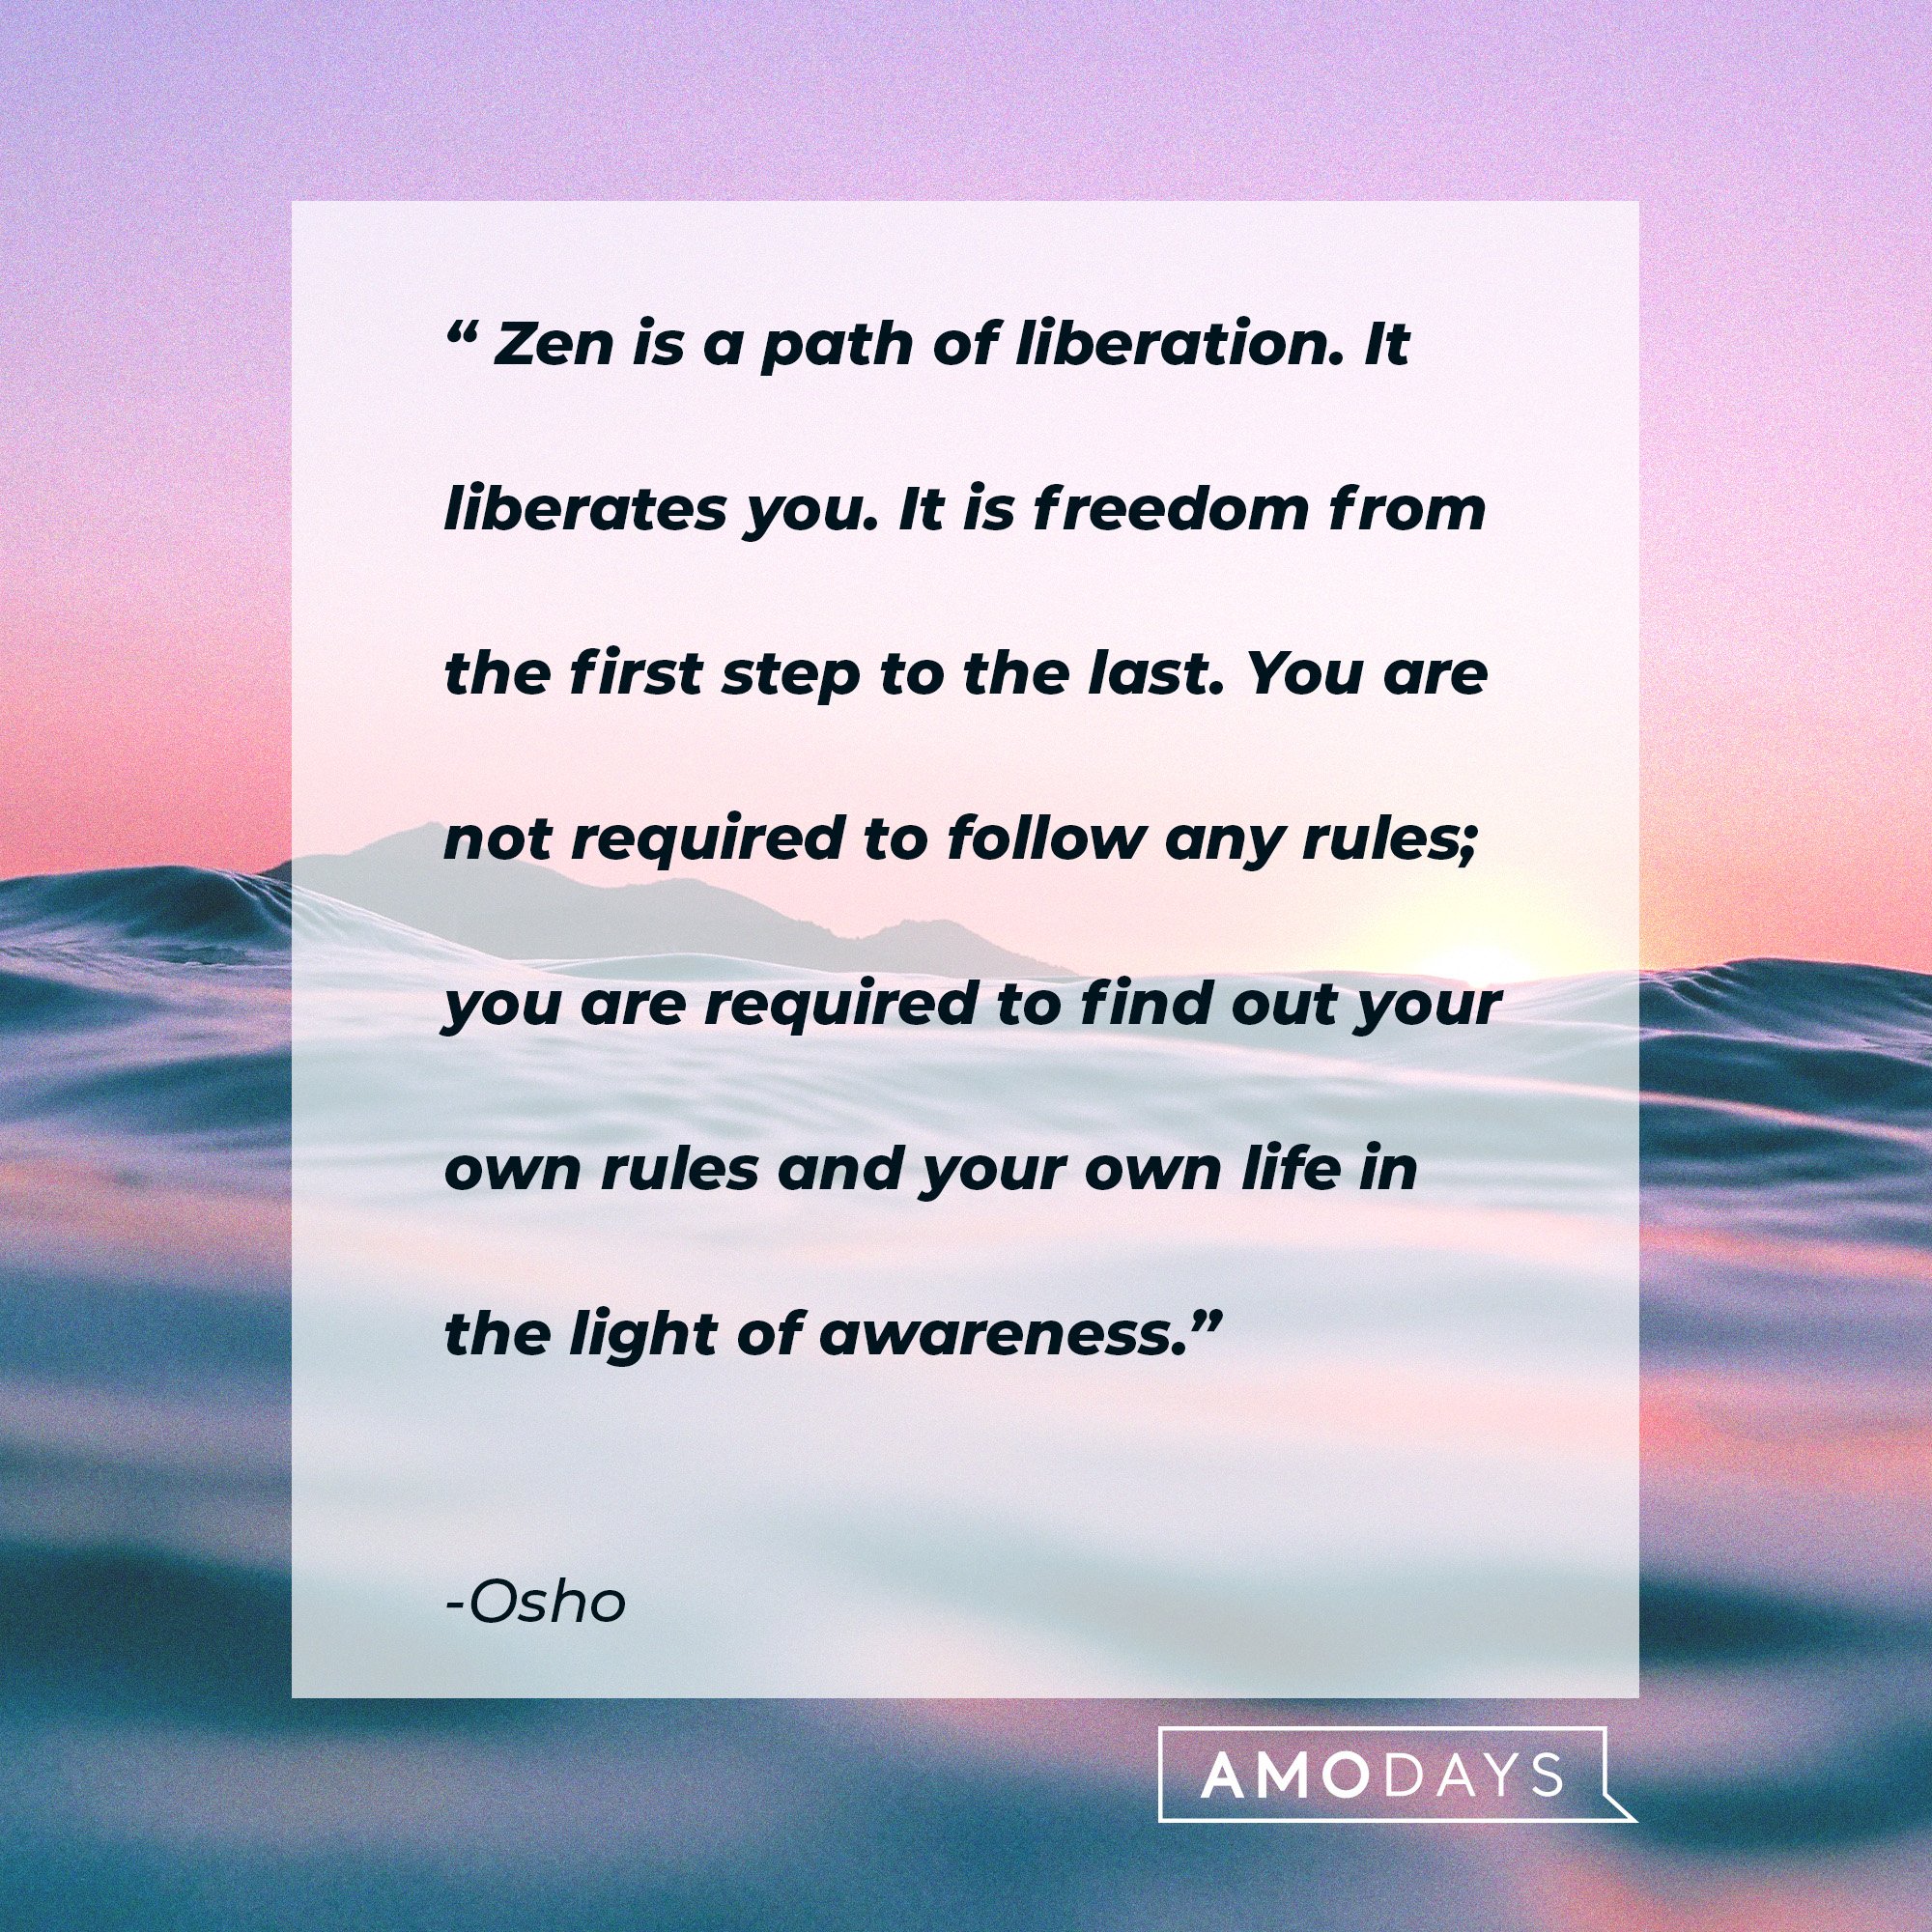  Osho's quote: “Zen is a path of liberation. It liberates you. It is freedom from the first step to the last. You are not required to follow any rules; you are required to find out your own rules and your own life in the light of awareness.” | Image: AmoDays